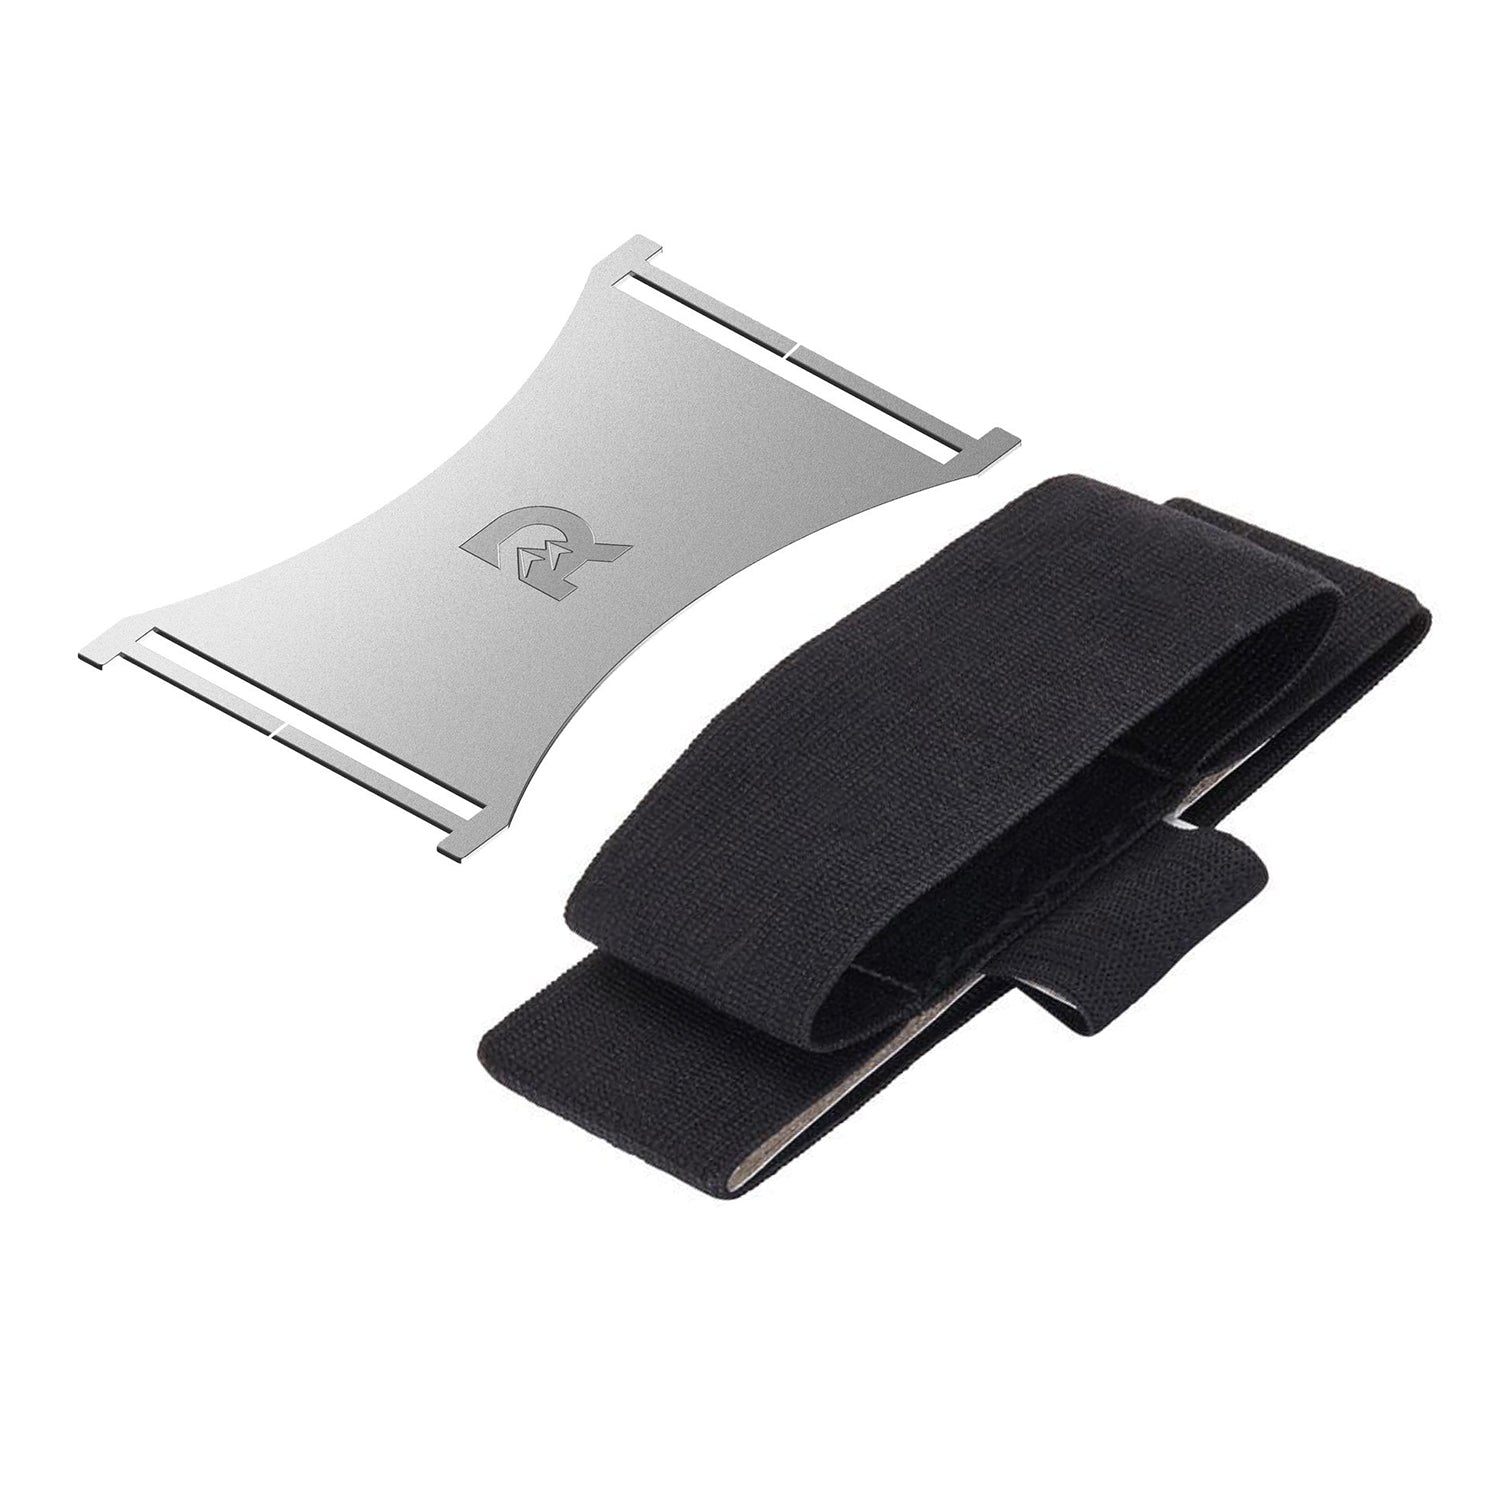 Replacement Money Clip for The Ridge Wallet